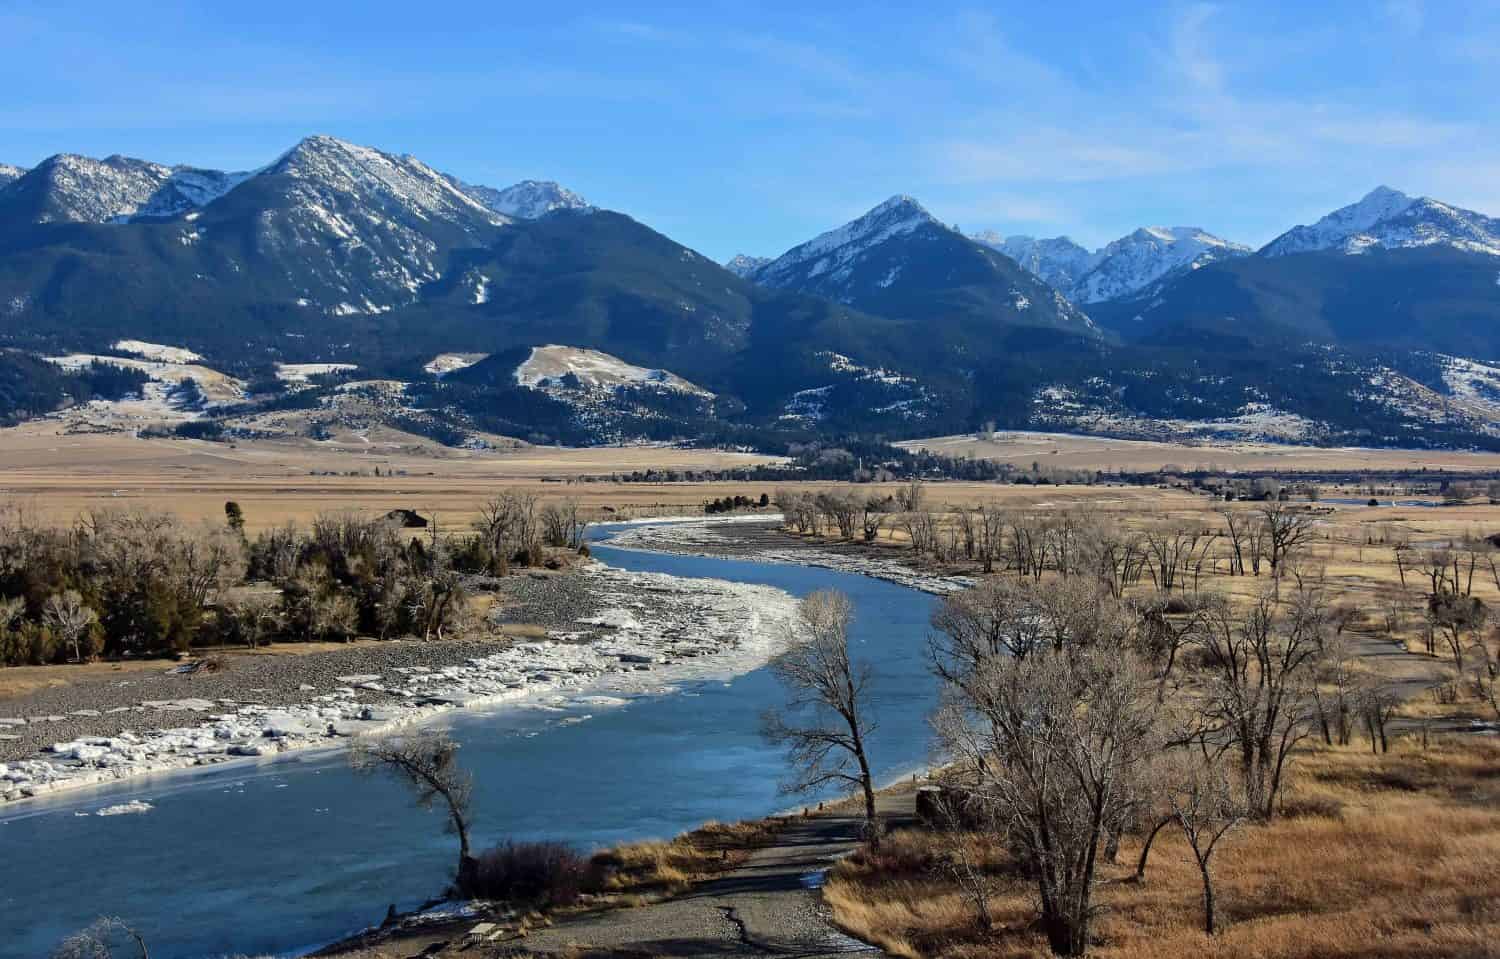 scenic winter landscape on a sunny day  at mallard's rest fishing access along the paradise valley scenic loop of the yellowstone river and gallatin range, south of livingston, montana